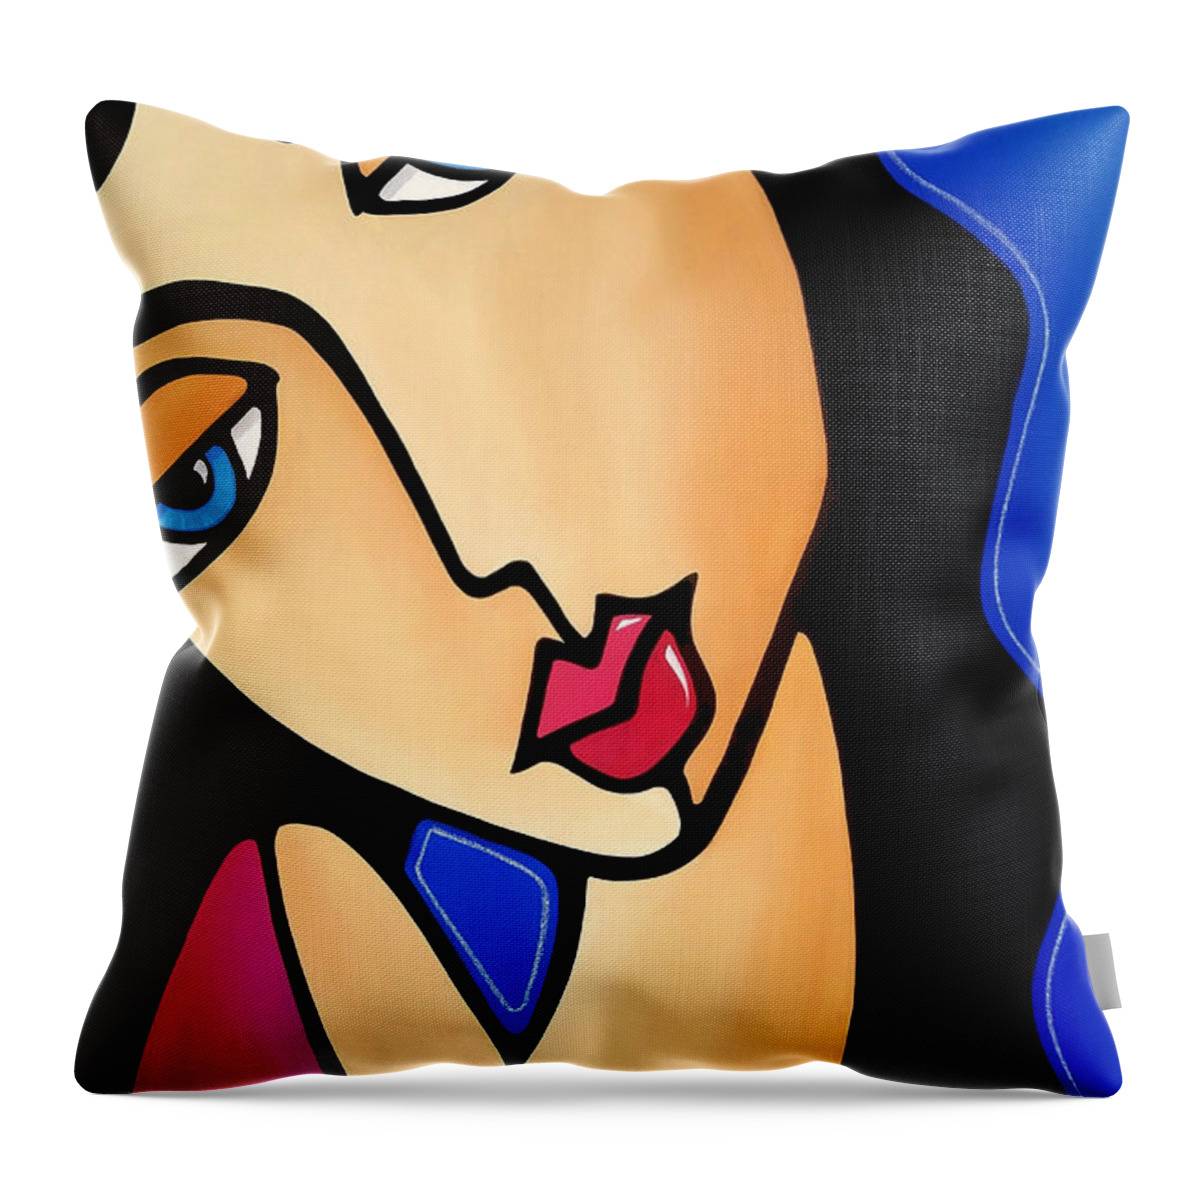 Fidostudio Throw Pillow featuring the painting Make Life Simple by Tom Fedro